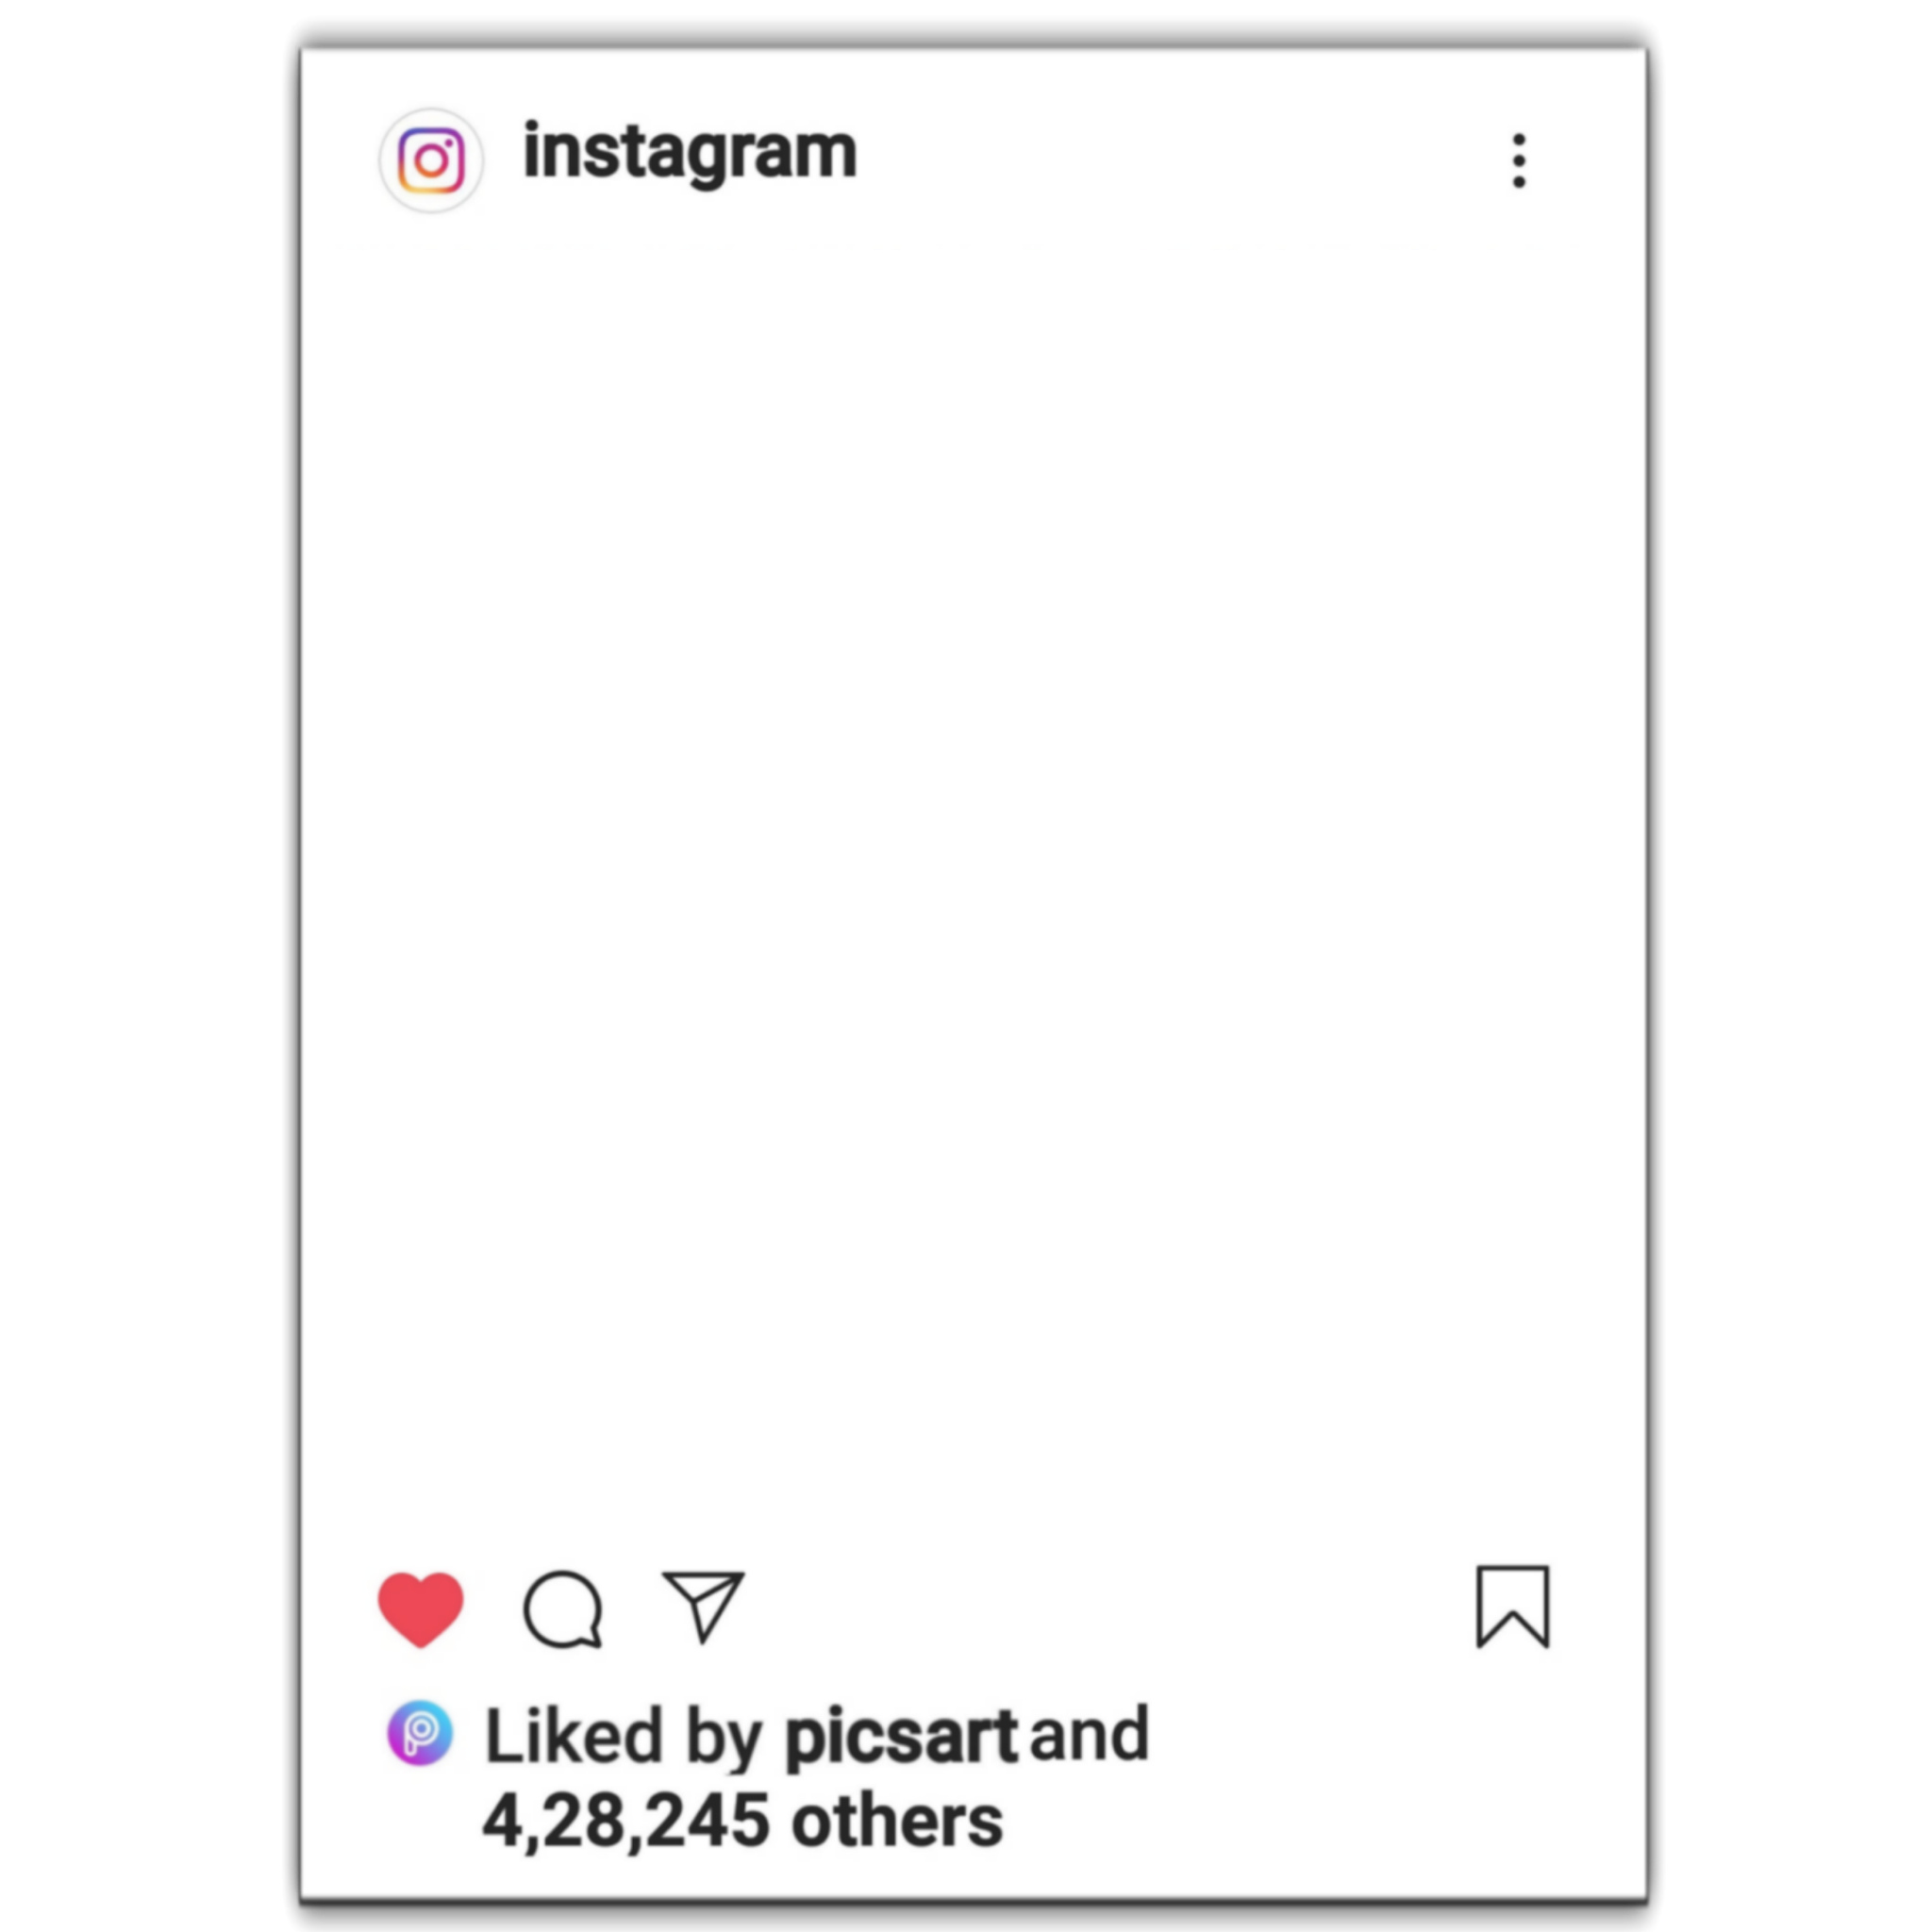 PicsArt 3D Instagram Wall Viral Photo Editing Tutorial Step By Step In Hindi In Picsart 2019